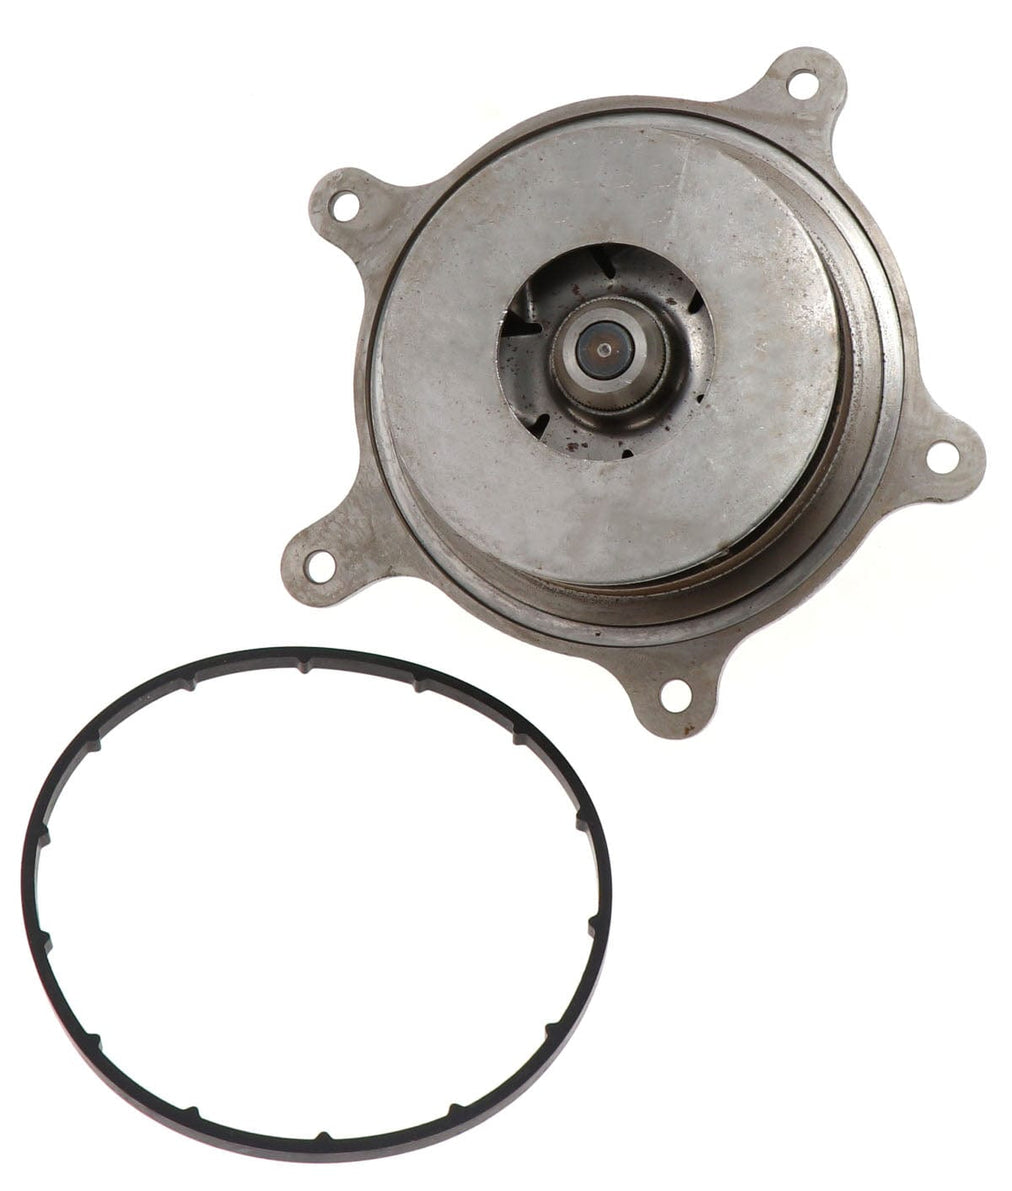 S-17036 | Genuine International® Water Pump Assembly DT466, DT466E